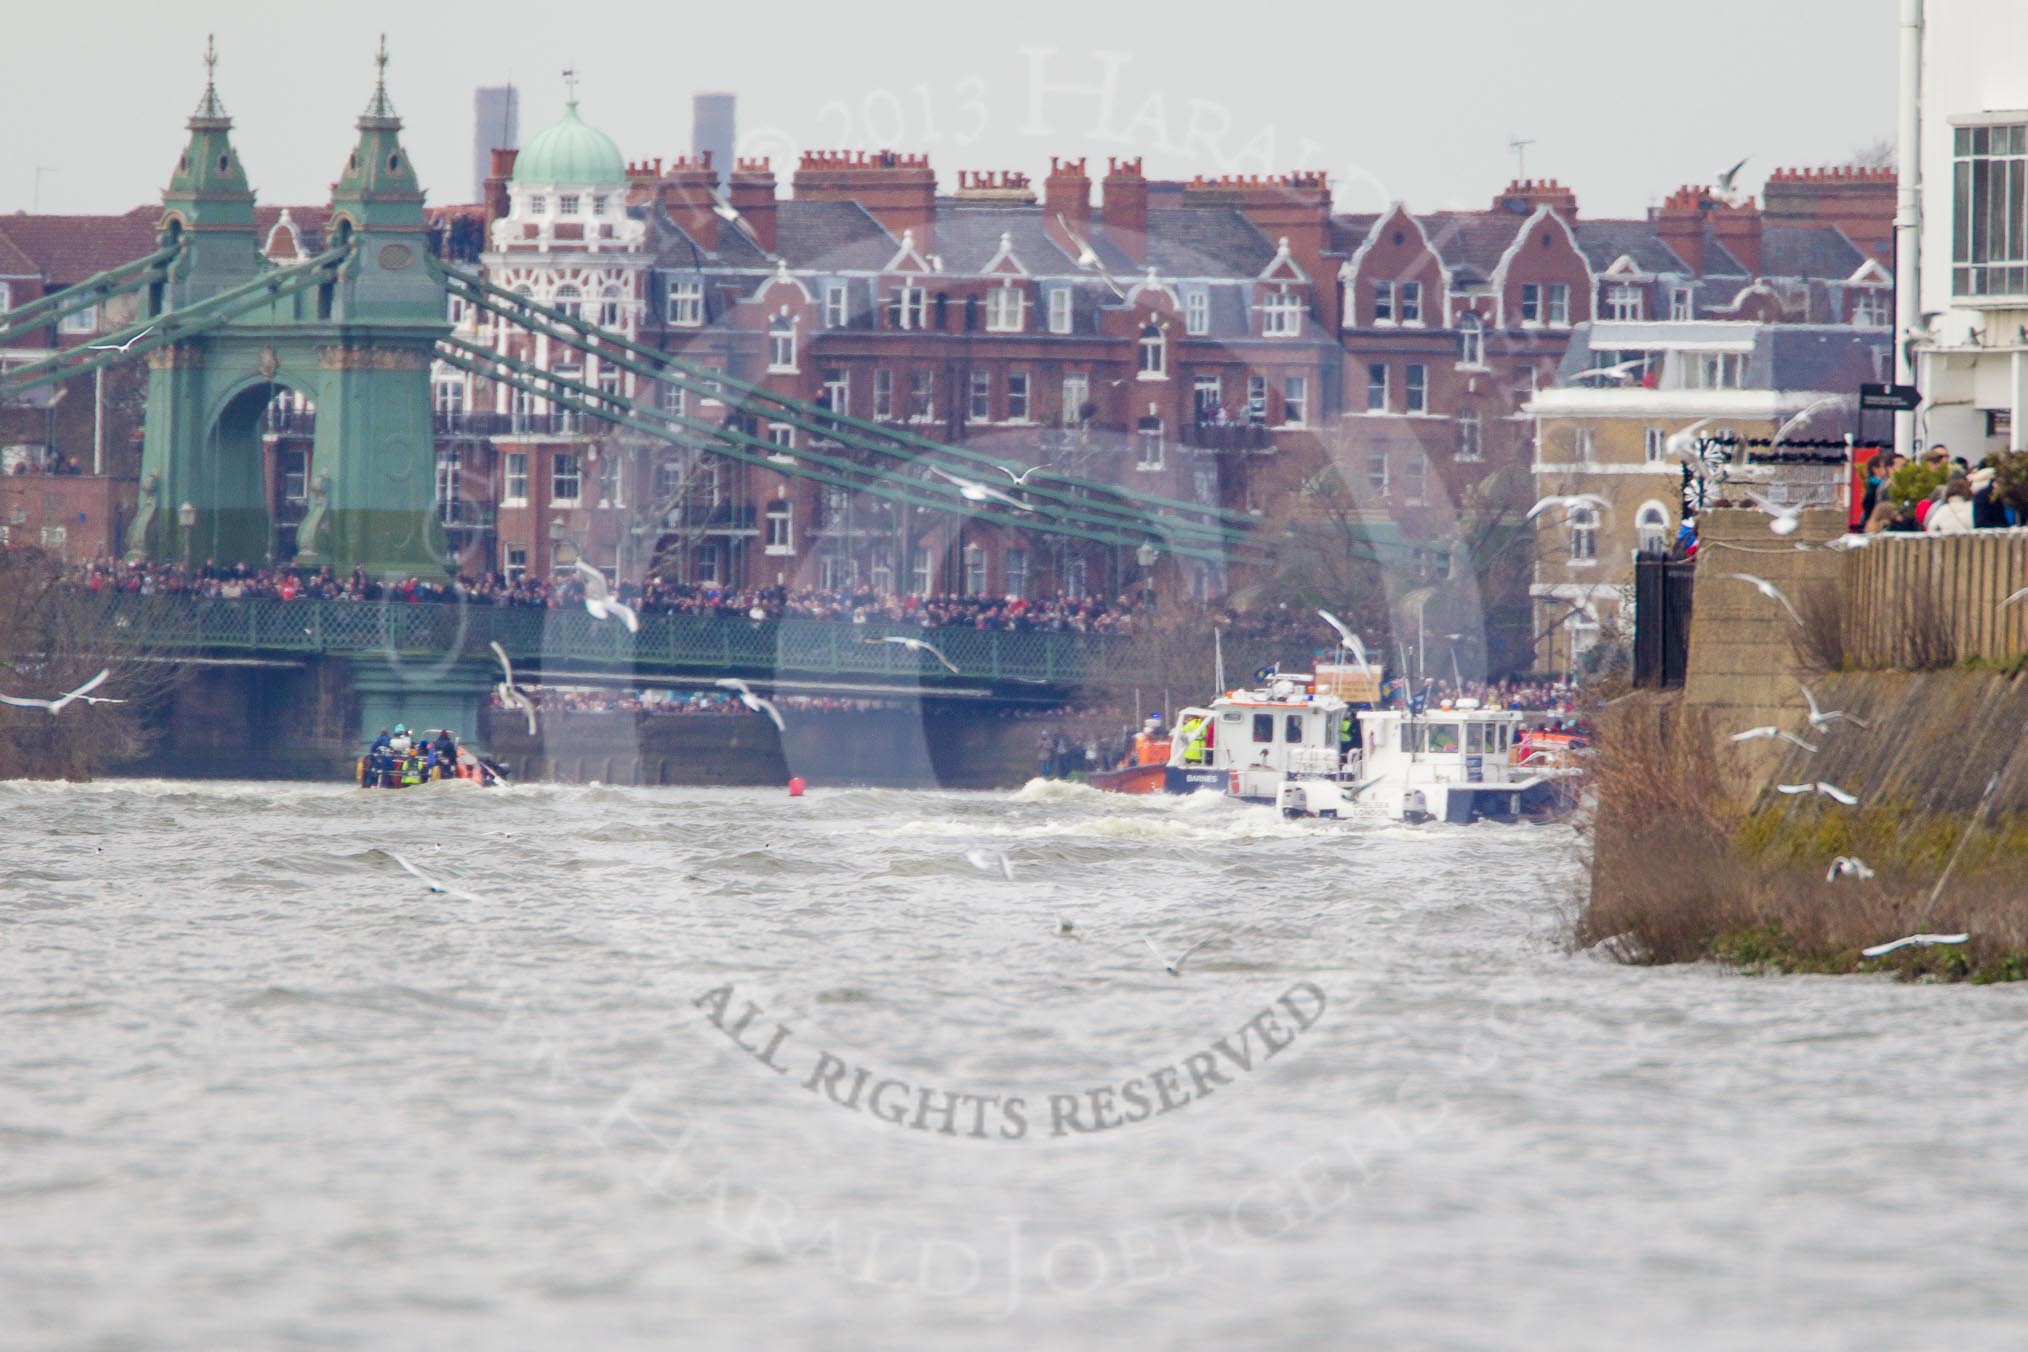 The Boat Race 2013.
Putney,
London SW15,

United Kingdom,
on 31 March 2013 at 16:36, image #341